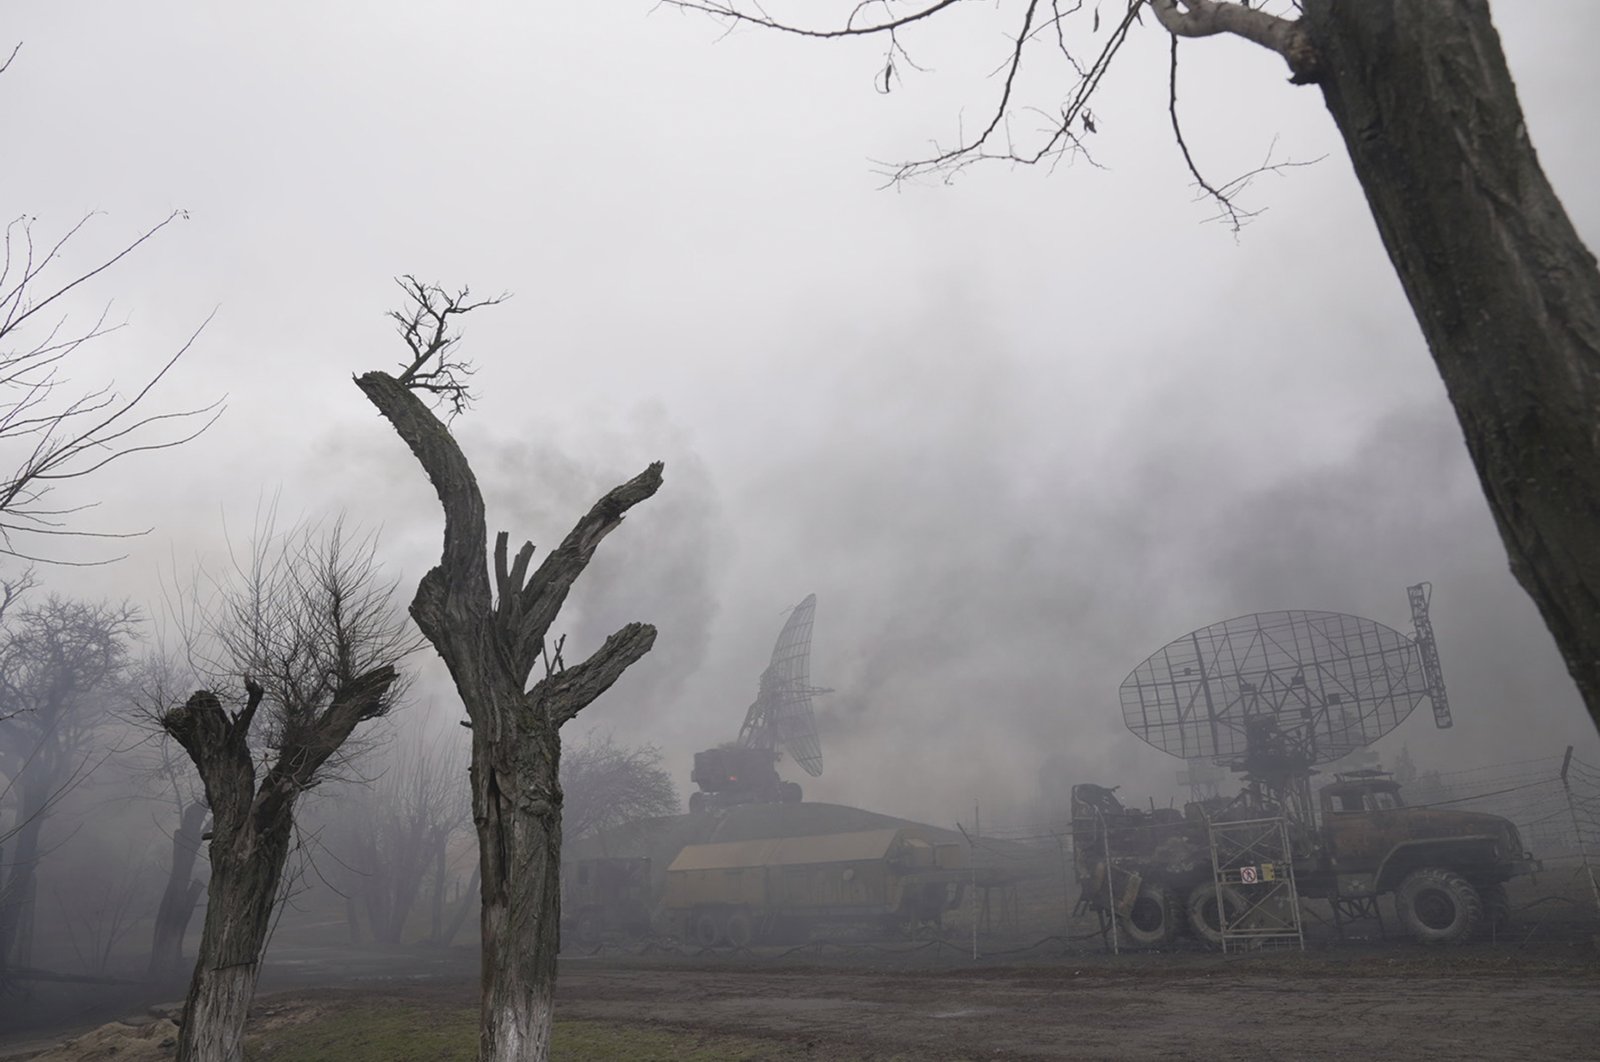 Smoke rises from an air defense base in the aftermath of an apparent Russian strike in Mariupol, Ukraine, Thursday, Feb. 24, 2022. (AP Photo)